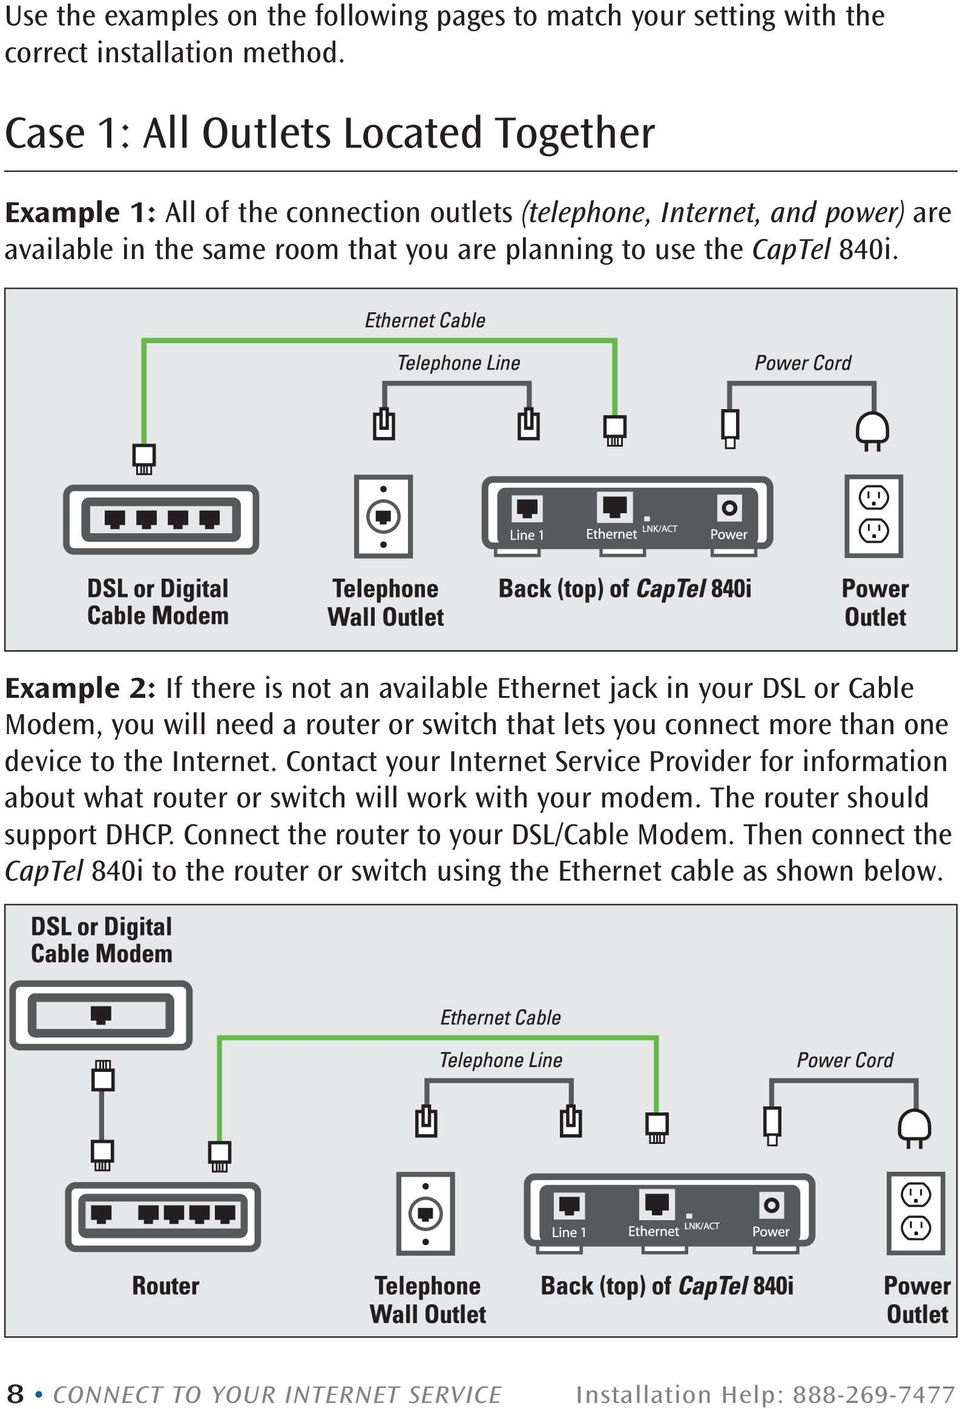 Example 2: If there is not an available Ethernet jack in your DSL or Cable Modem, you will need a router or switch that lets you connect more than one device to the Internet.